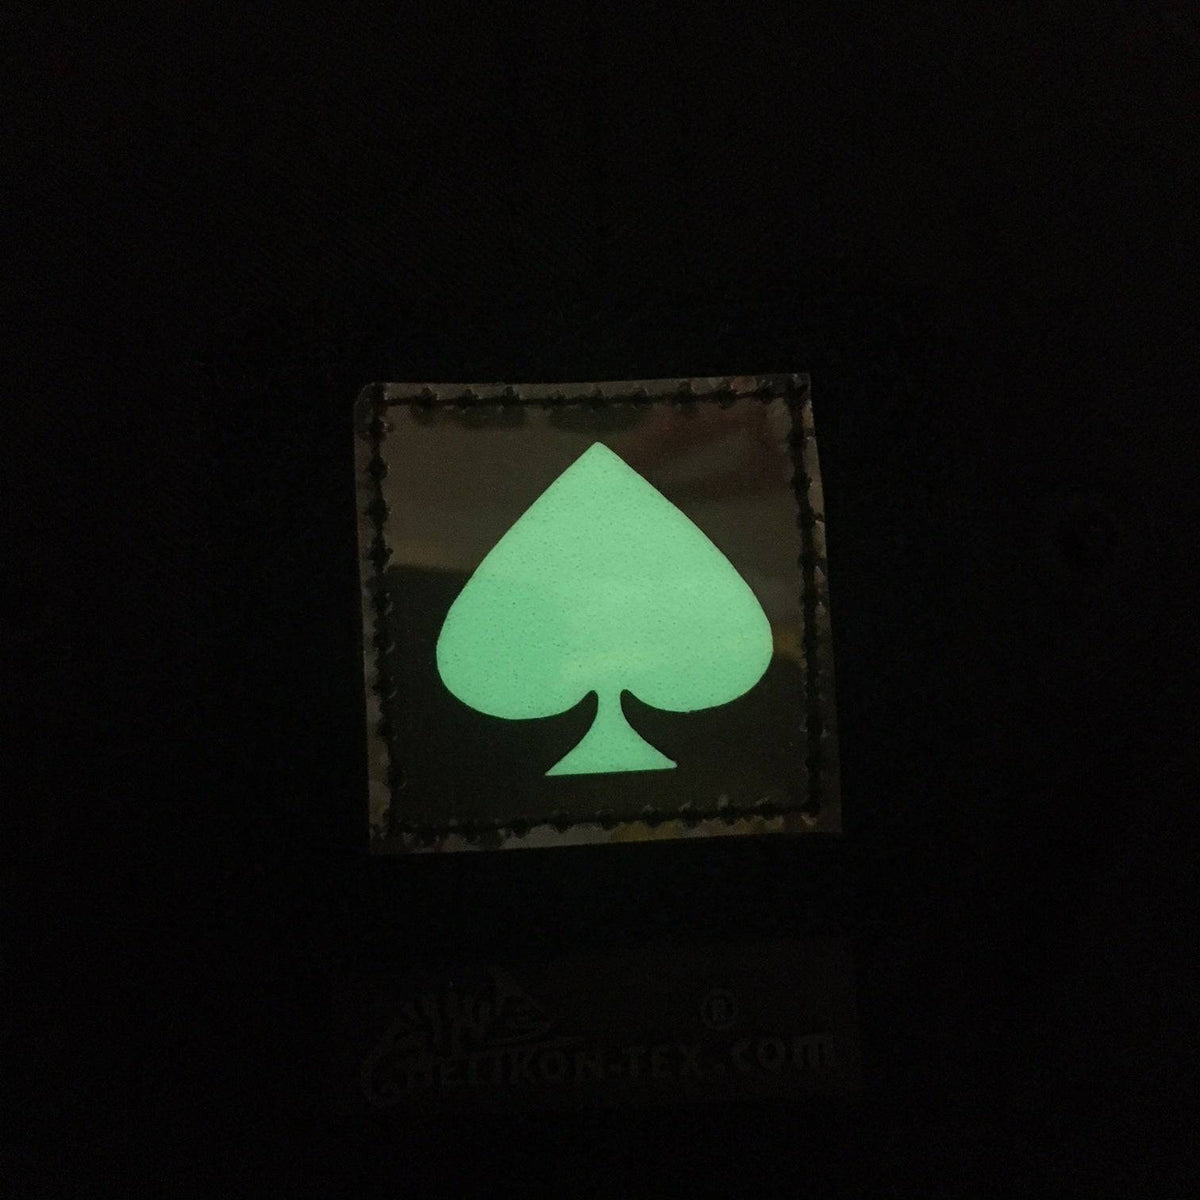 1 INCH HEART PATCH - GLOW IN THE DARK - The Morale Patches